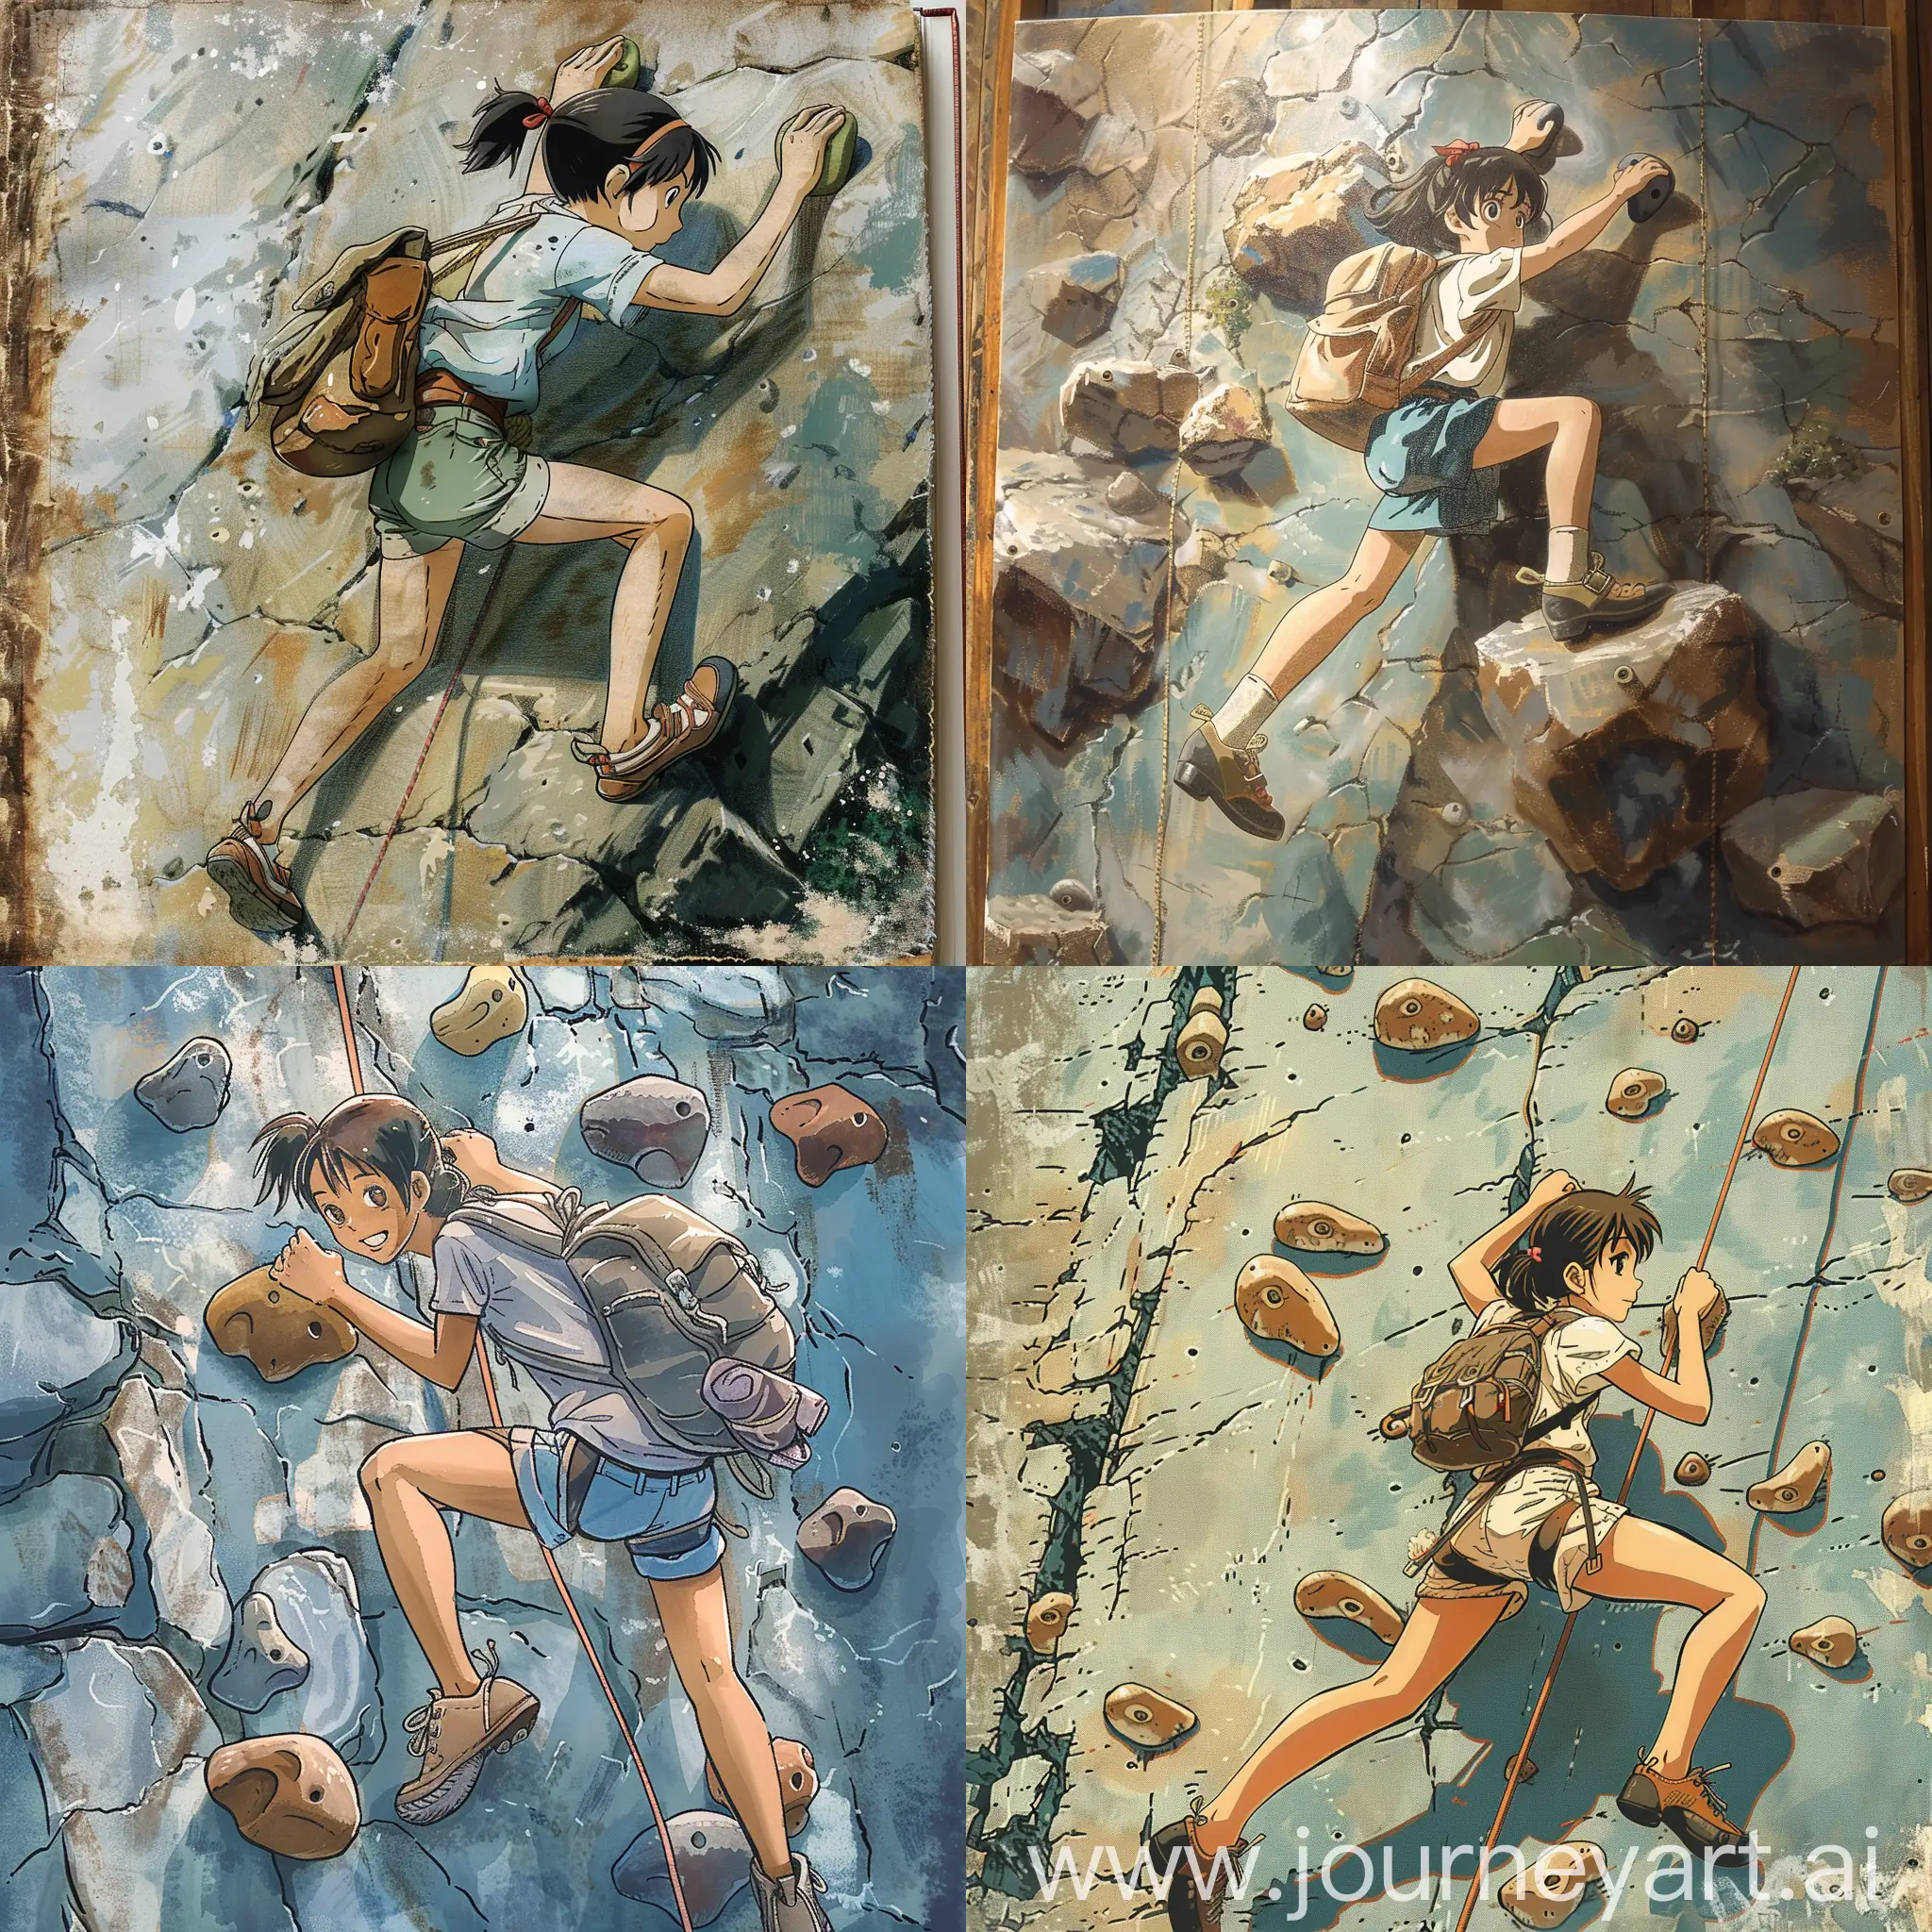 young girl climbing a rock wall of book in the style of miyazaki